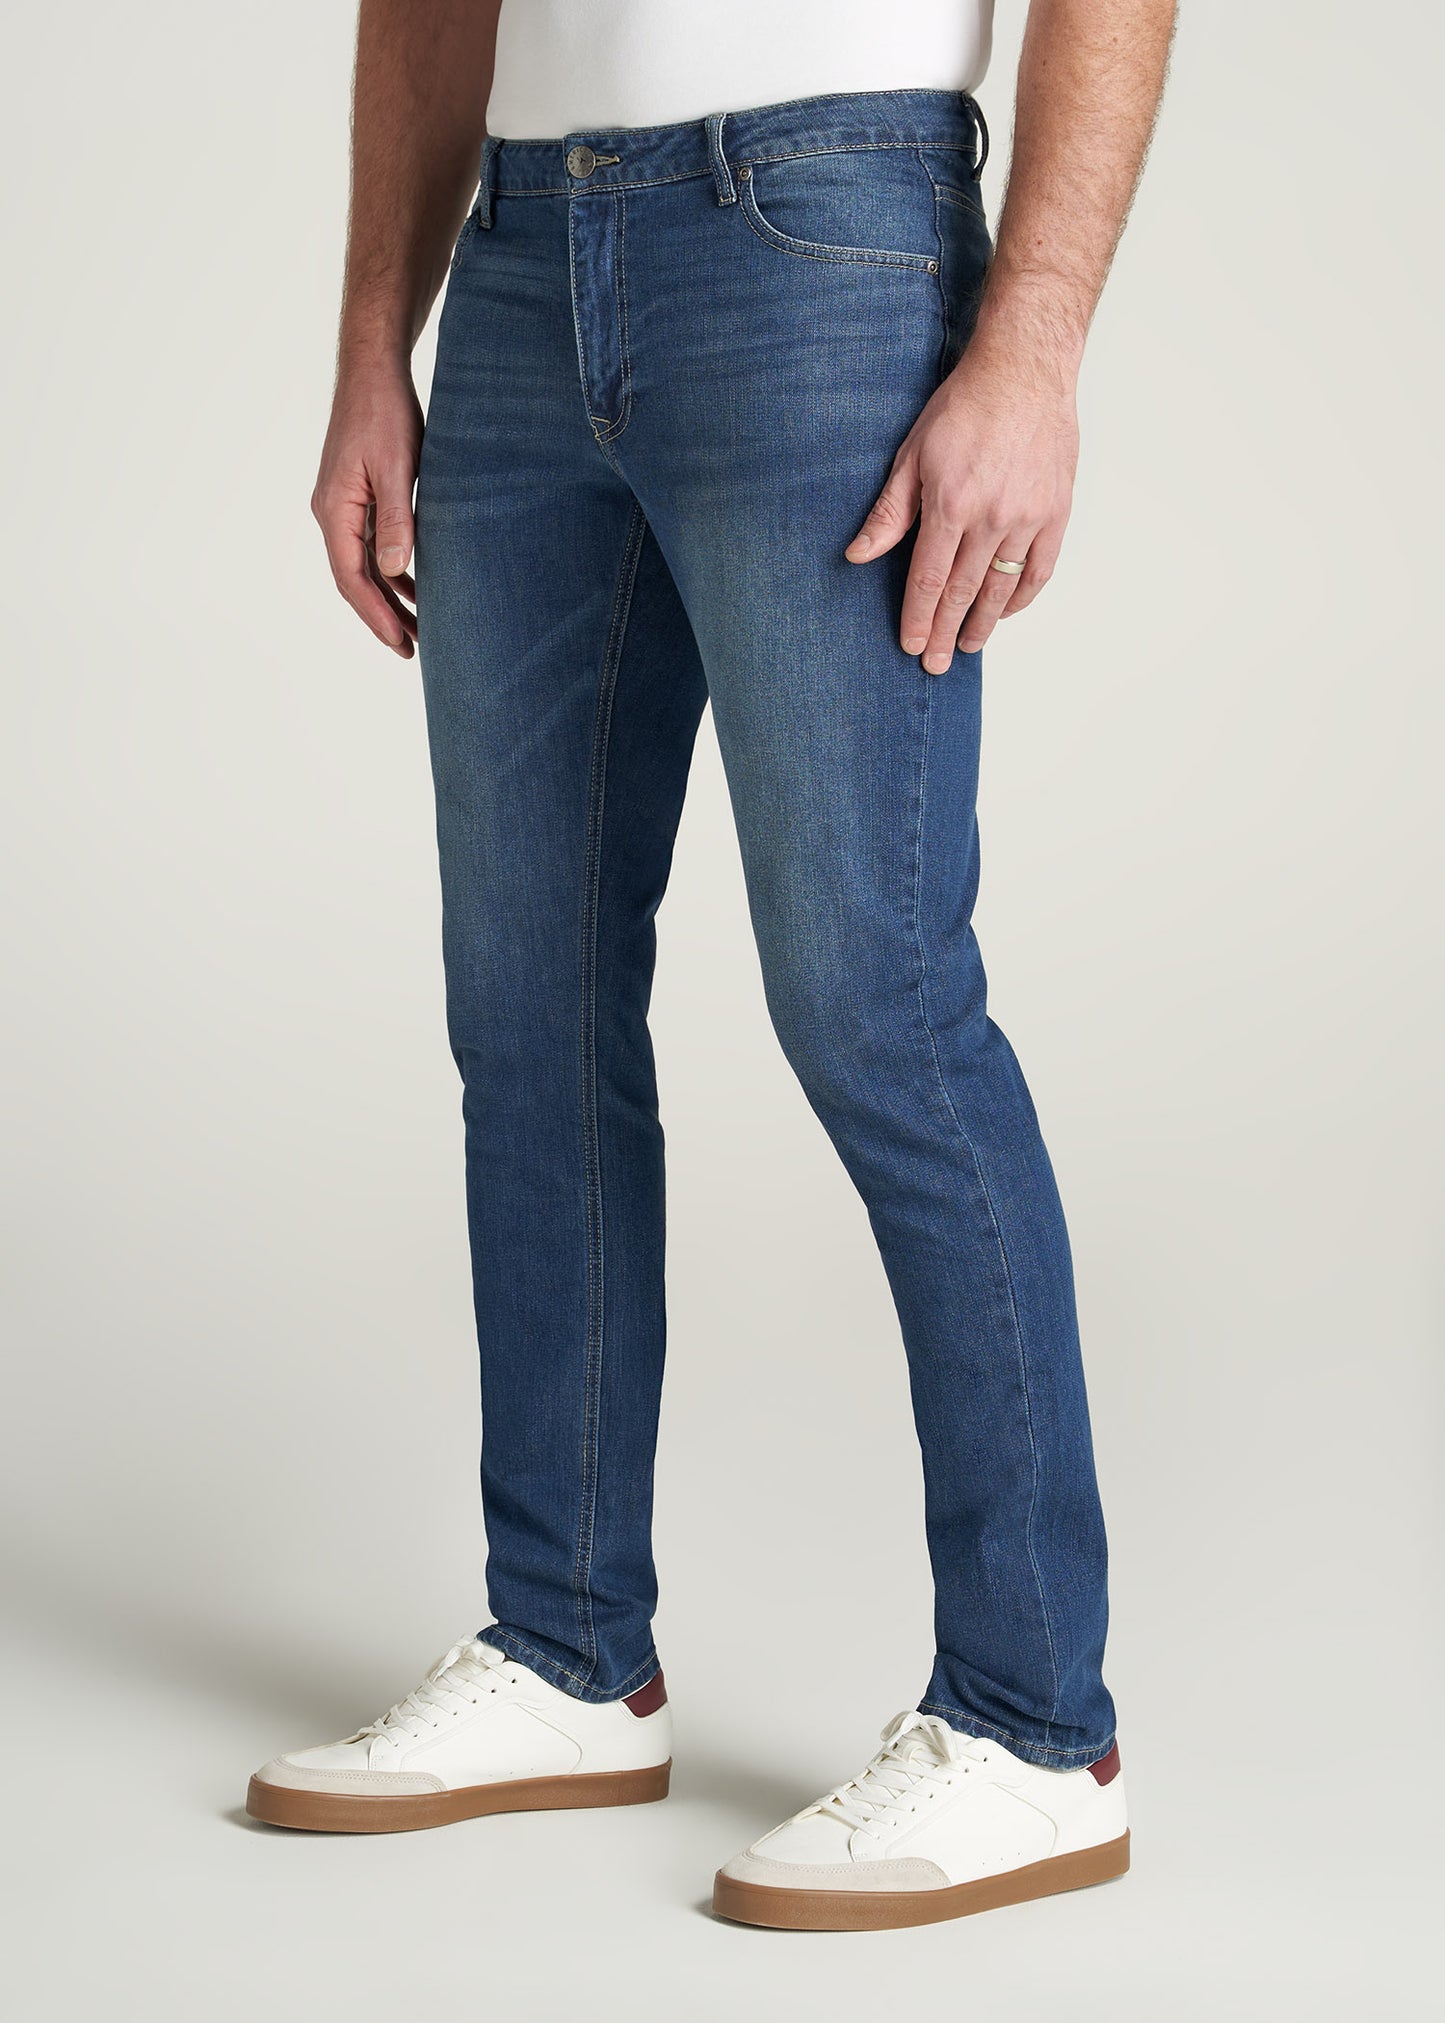    American-Tall-Men-Carman-TaperedFit-Jeans-ClassicBlue-side